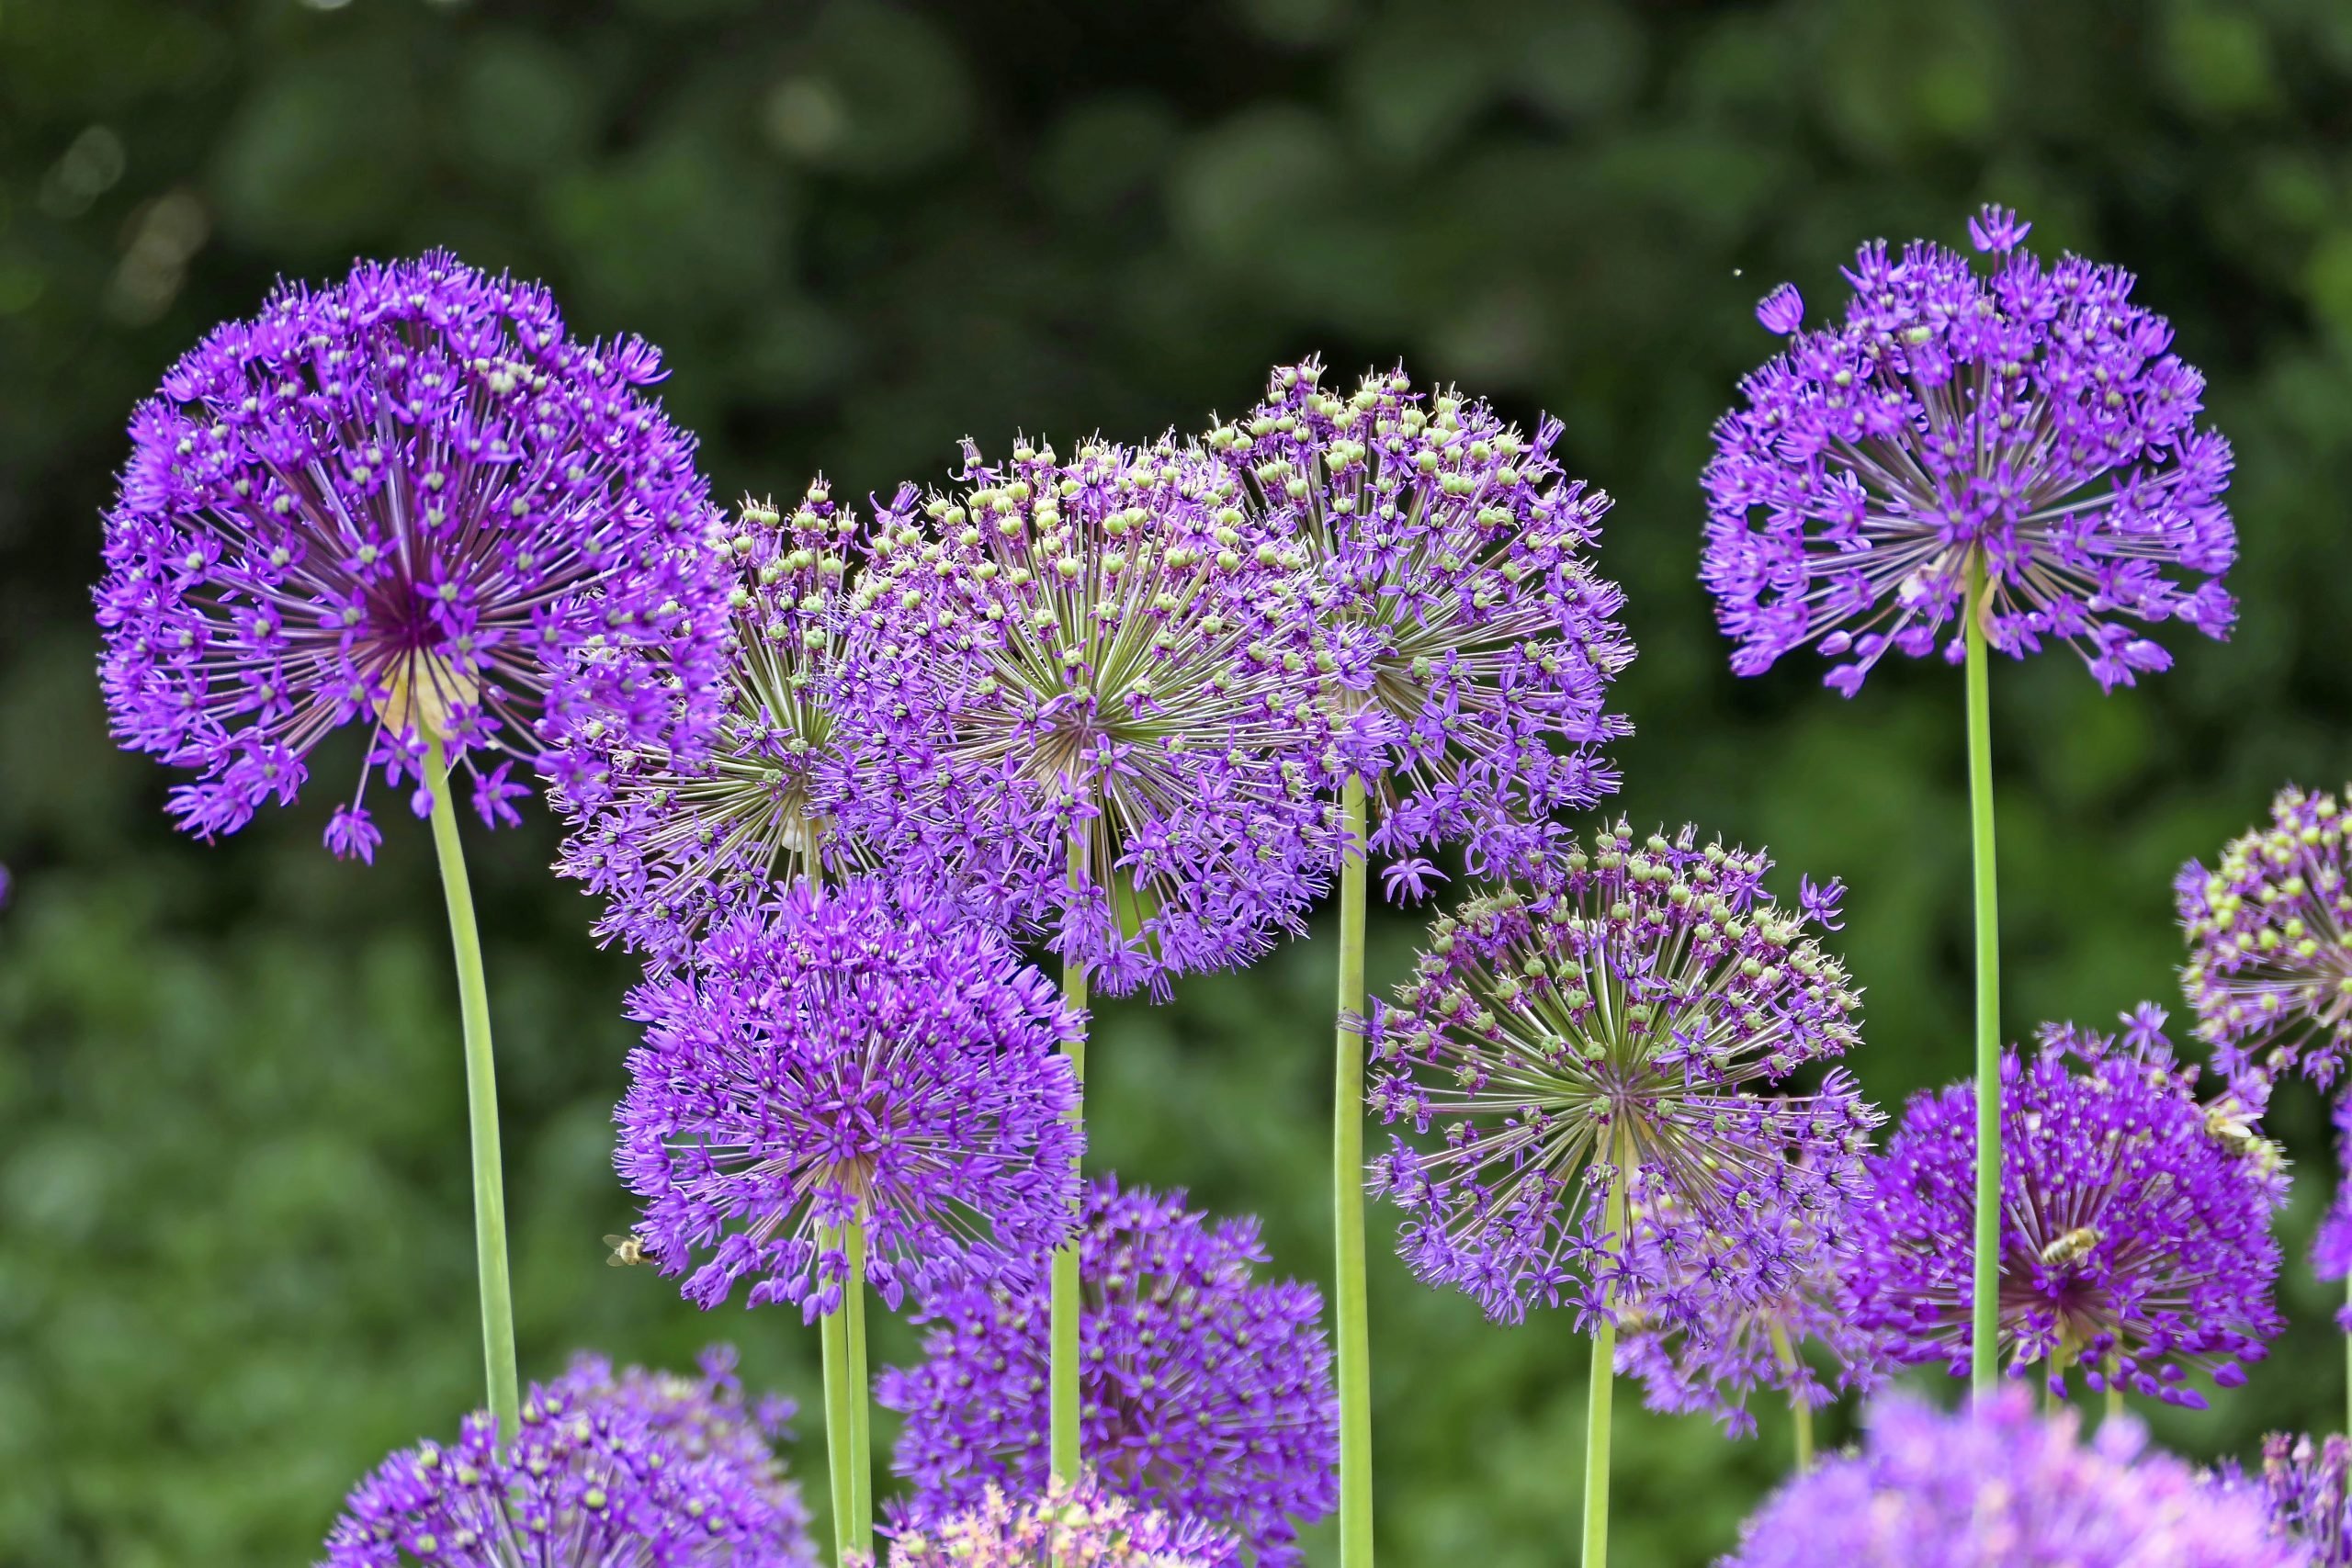 Allium Flower Care and Growing Tips